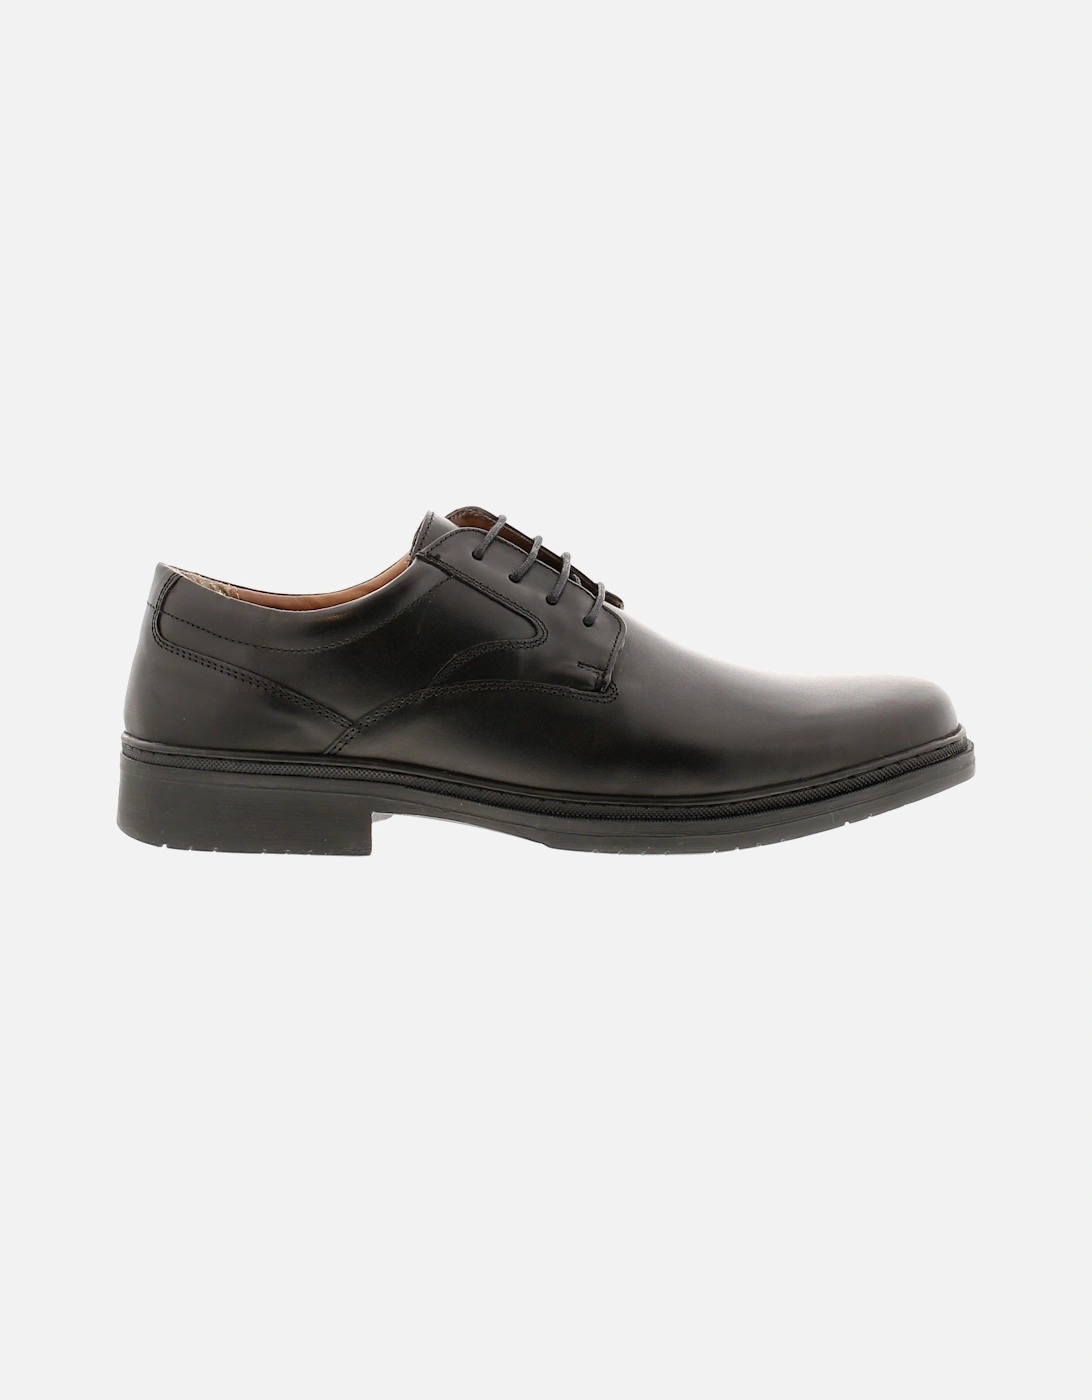 Mens Shoes Oxford Derby Stroll Leather black UK Size